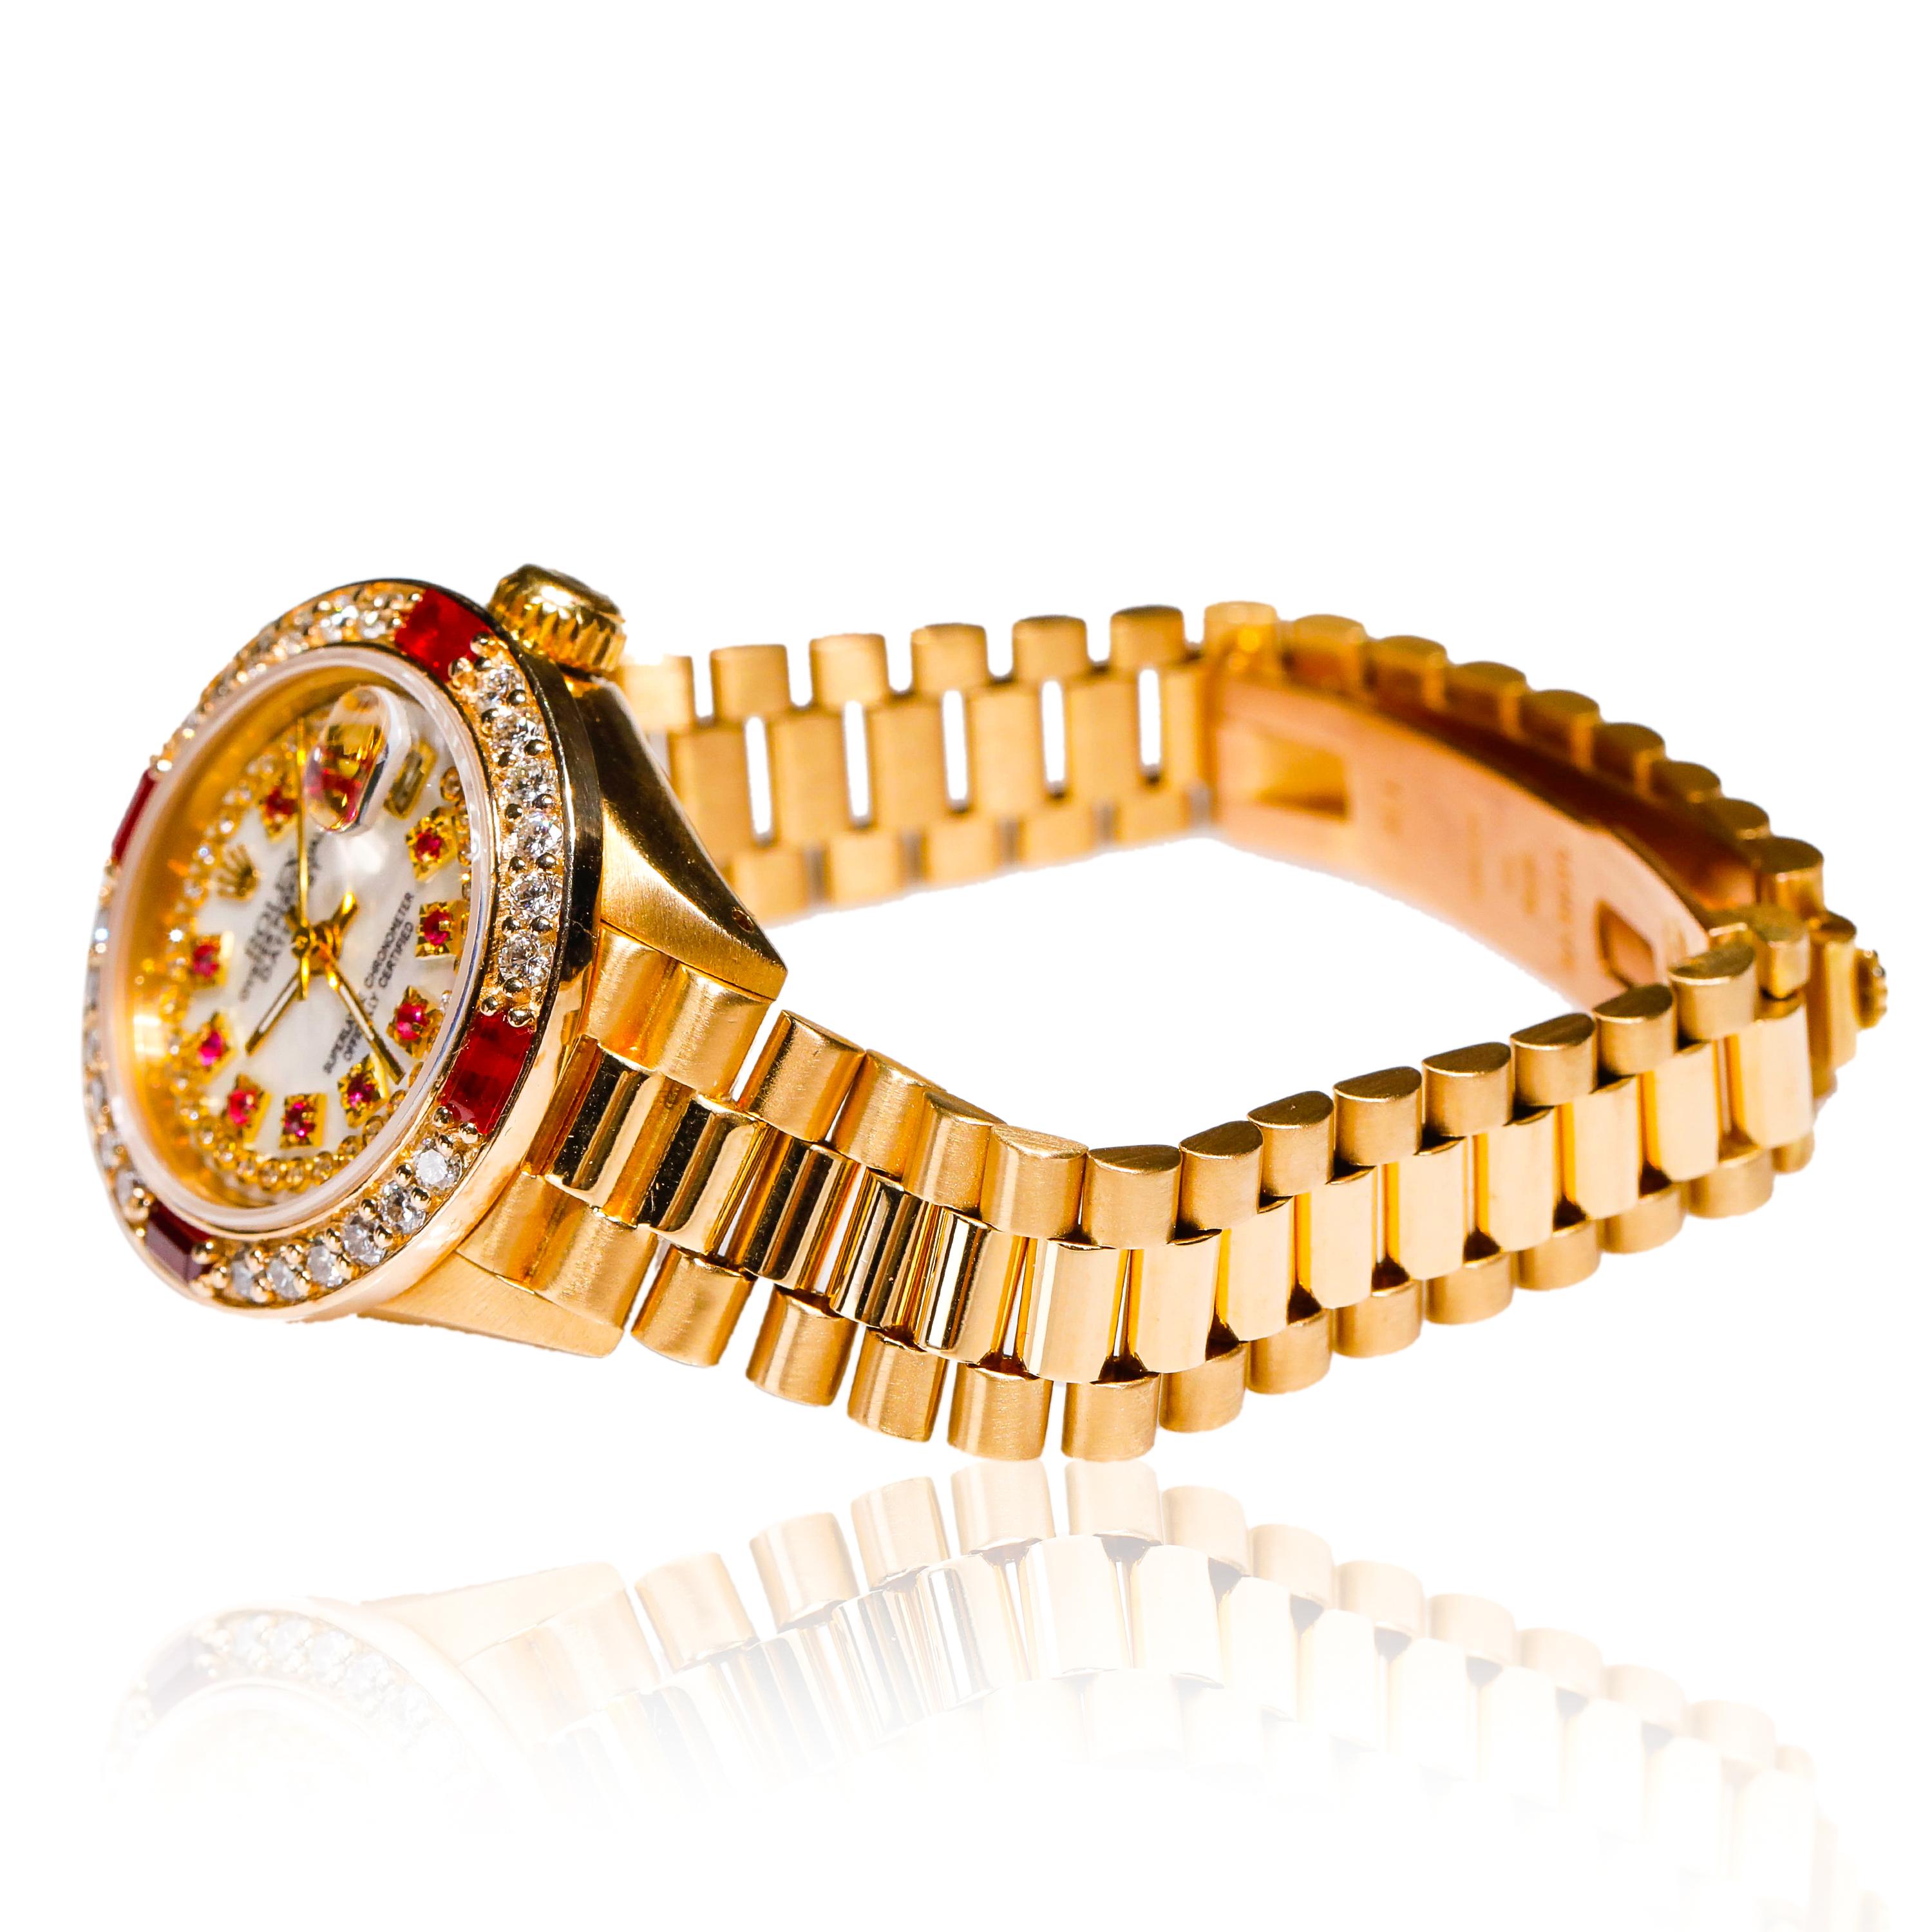 Rolex Ladies President 18k Yellow Gold Ruby Watch Mother of Pearl Diamond Dial

SKU: WA00001

PRIMARY DETAILS
Brand:  Rolex
Model: ROLEX 18k YELLOW GOLD LADIES PRESIDENT
Country of Origin: Switzerland
Movement Type: Automatic
Year of Manufacture: